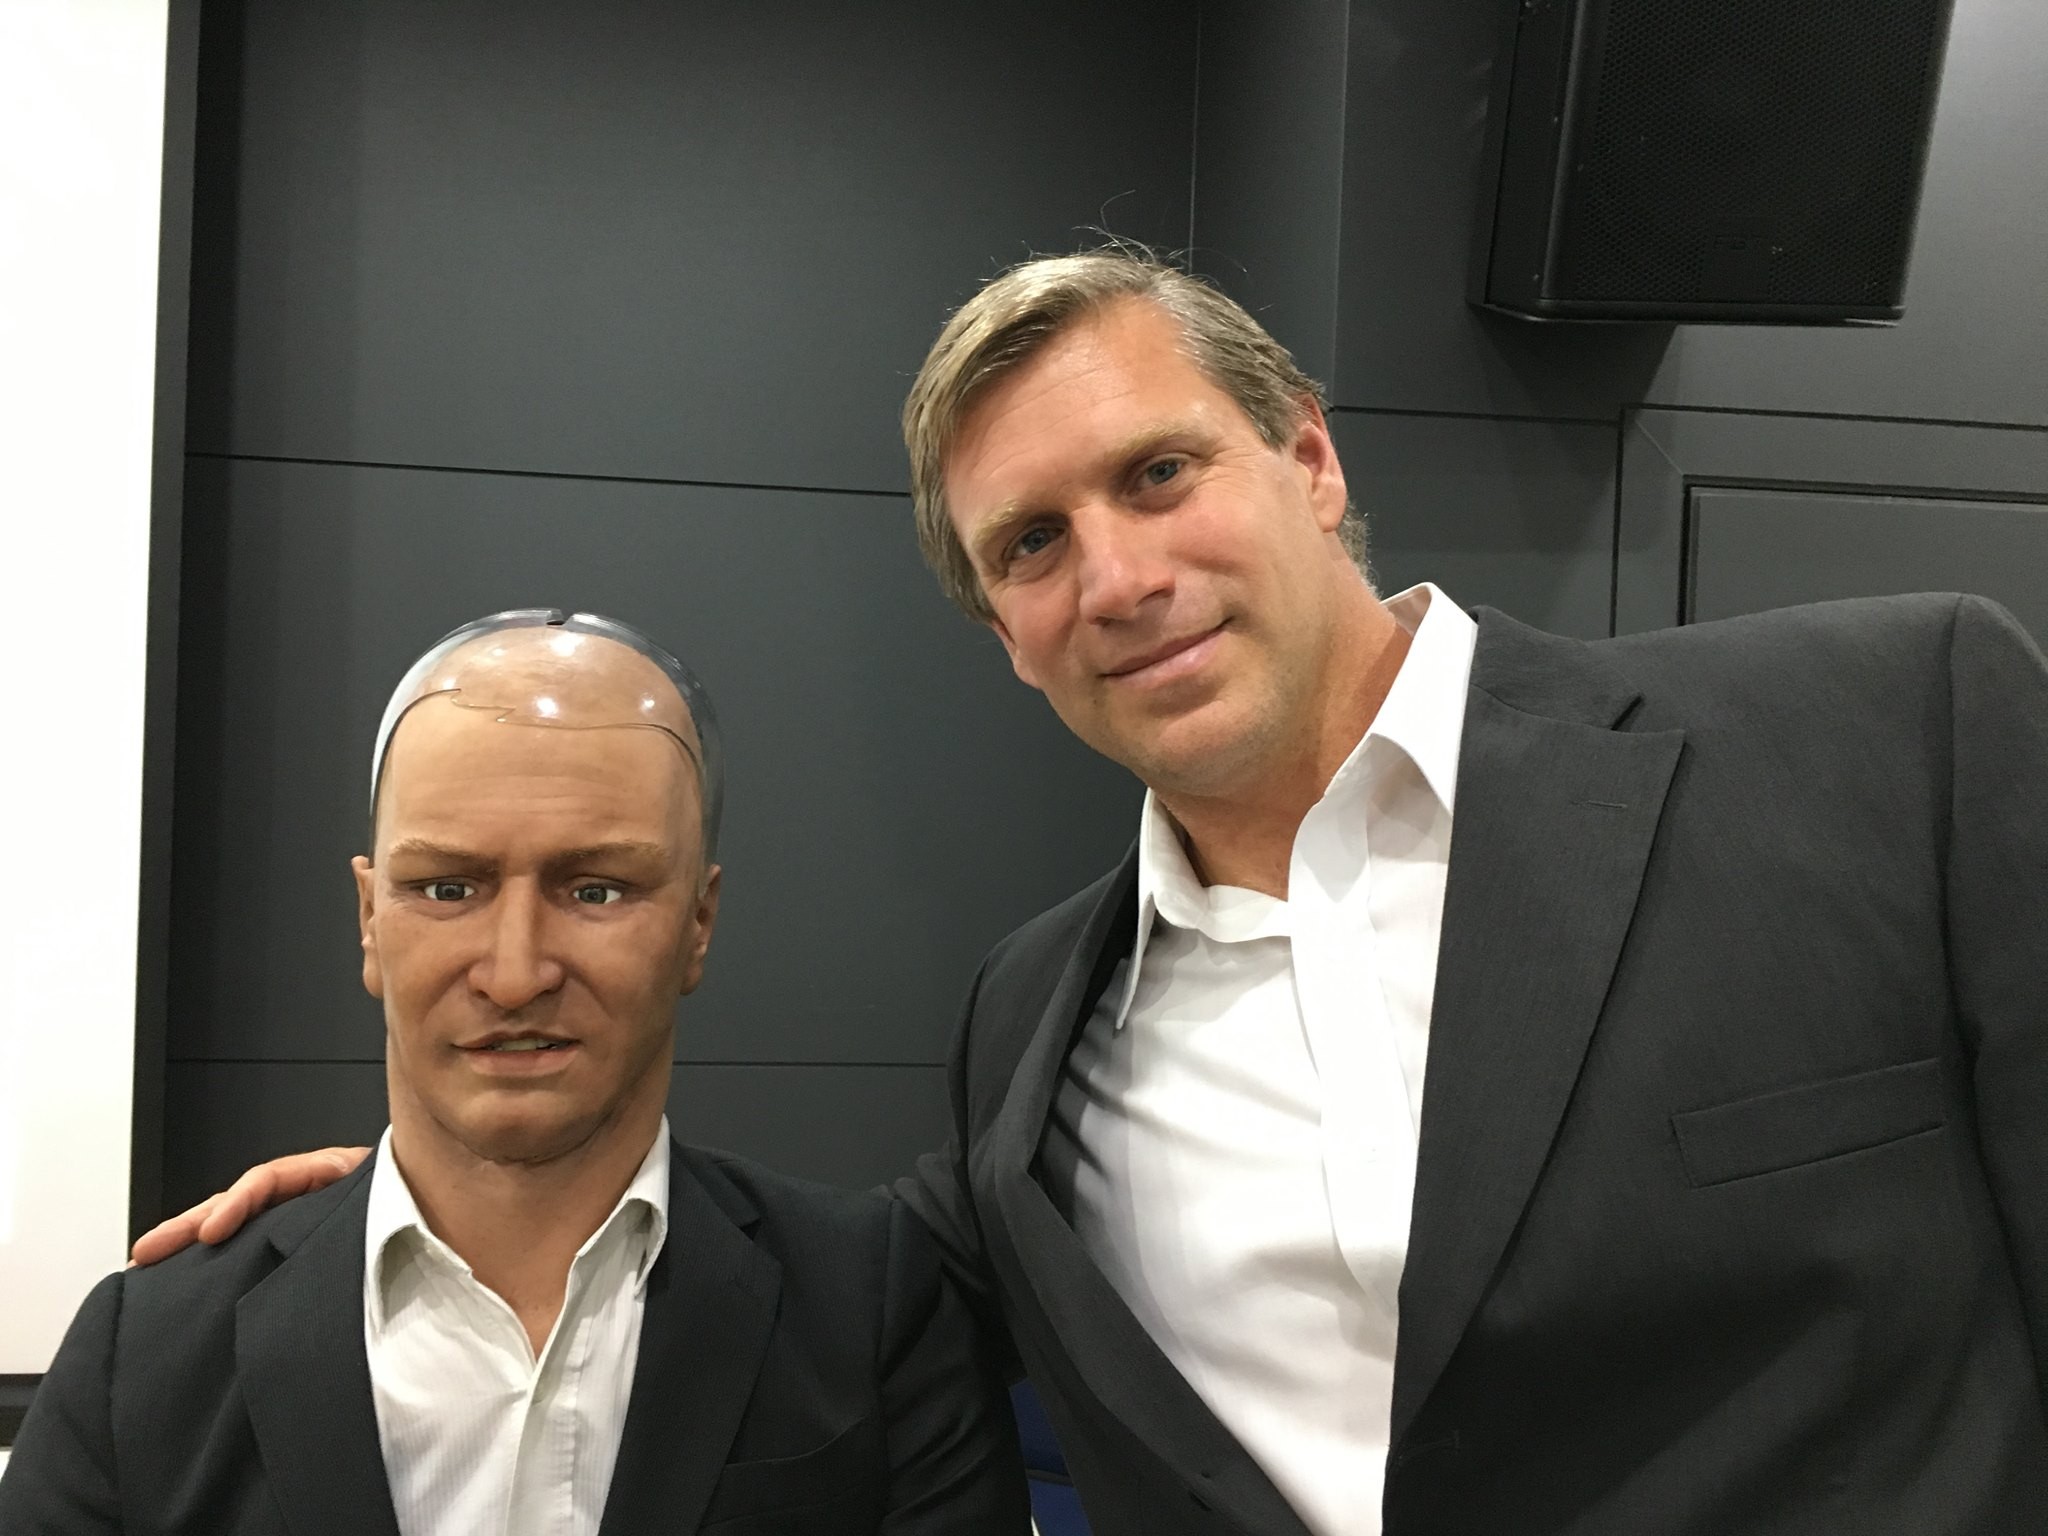 Enter Zoltan Istvan, the wannabe governor of California whose transhumanist agenda has influential fans, including dotcom billionaires hoping to live forever